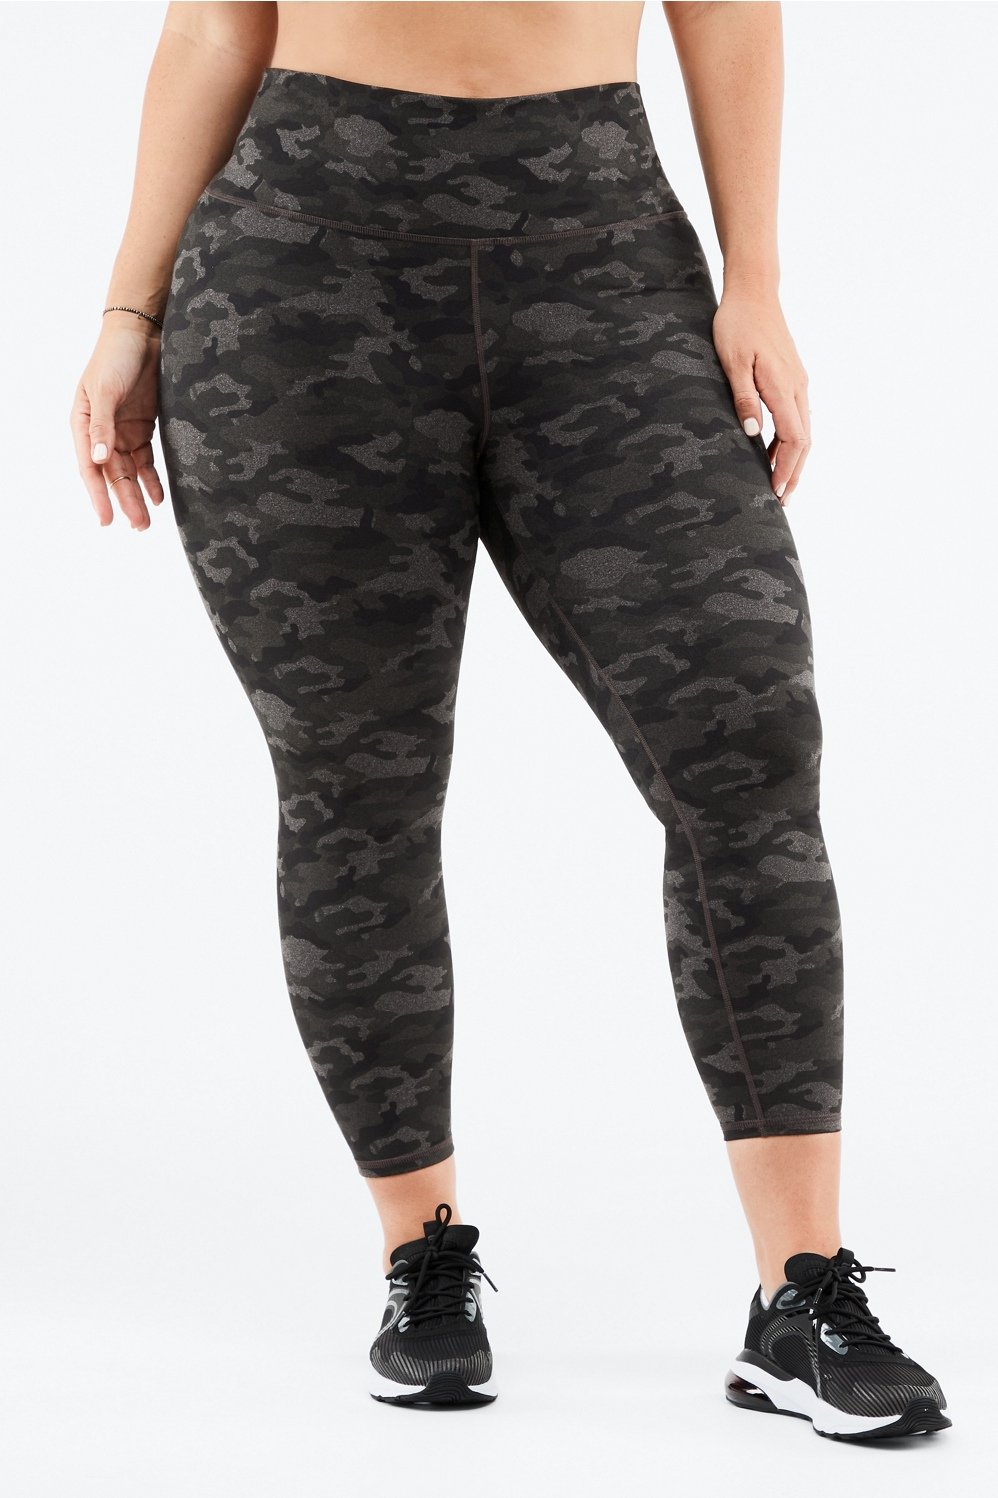 Fabletics PowerHold Leggings Gray Size XS - $19 (70% Off Retail) - From  Shalyn